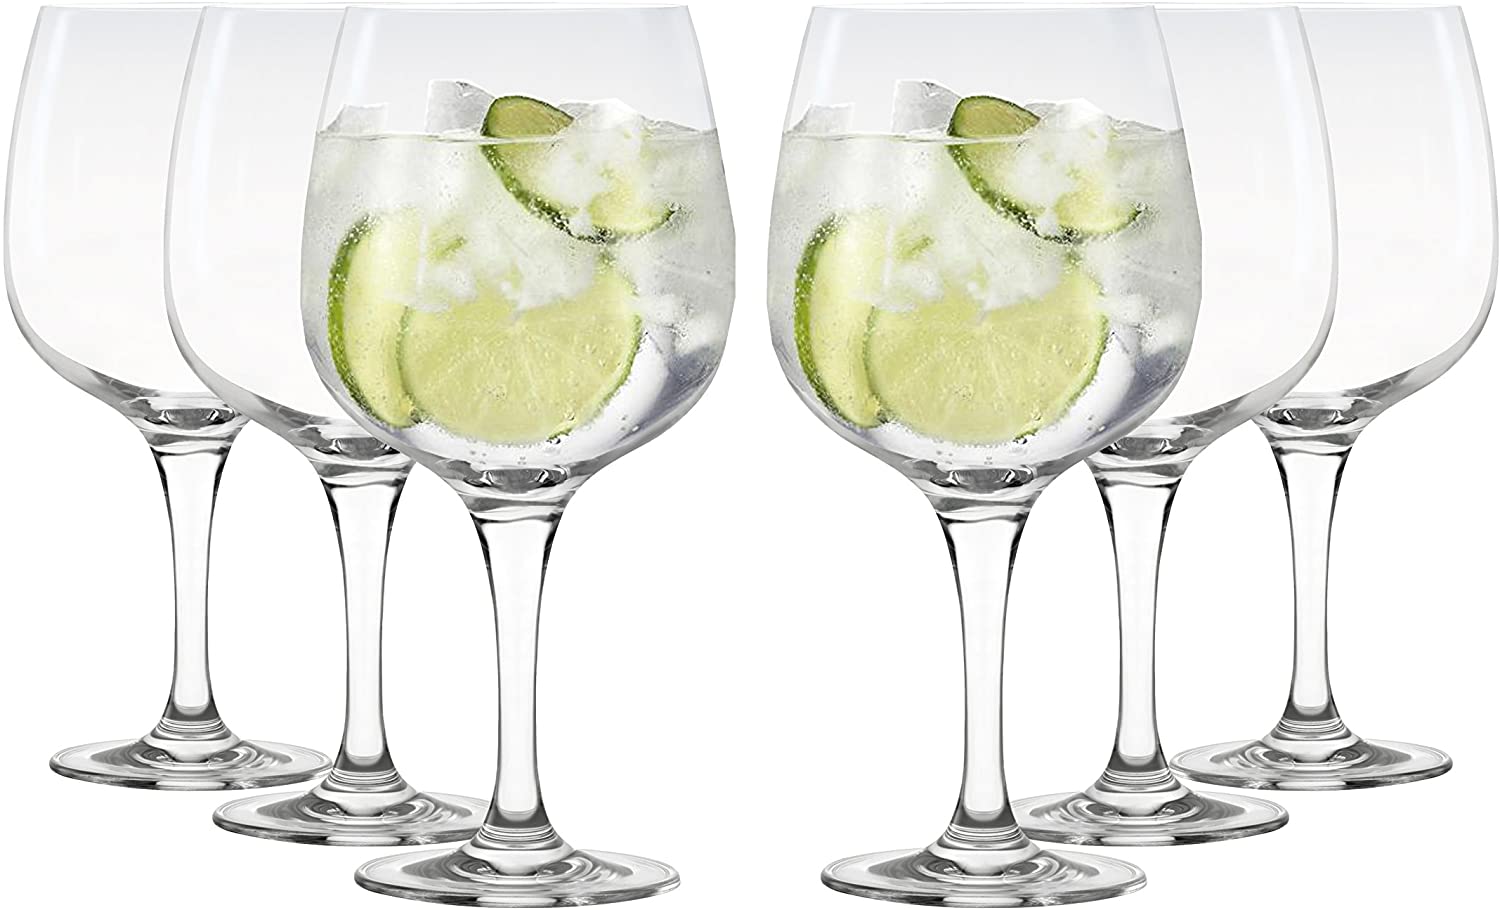 Stalzle Stölzle Lausitz 160 00 37 Gin Tonic Glasses Cocktail Glasses Set of 6 Dishwasher Safe Lead-Free Crystal Glass 755 ml Catering & Hotel Industry Quality